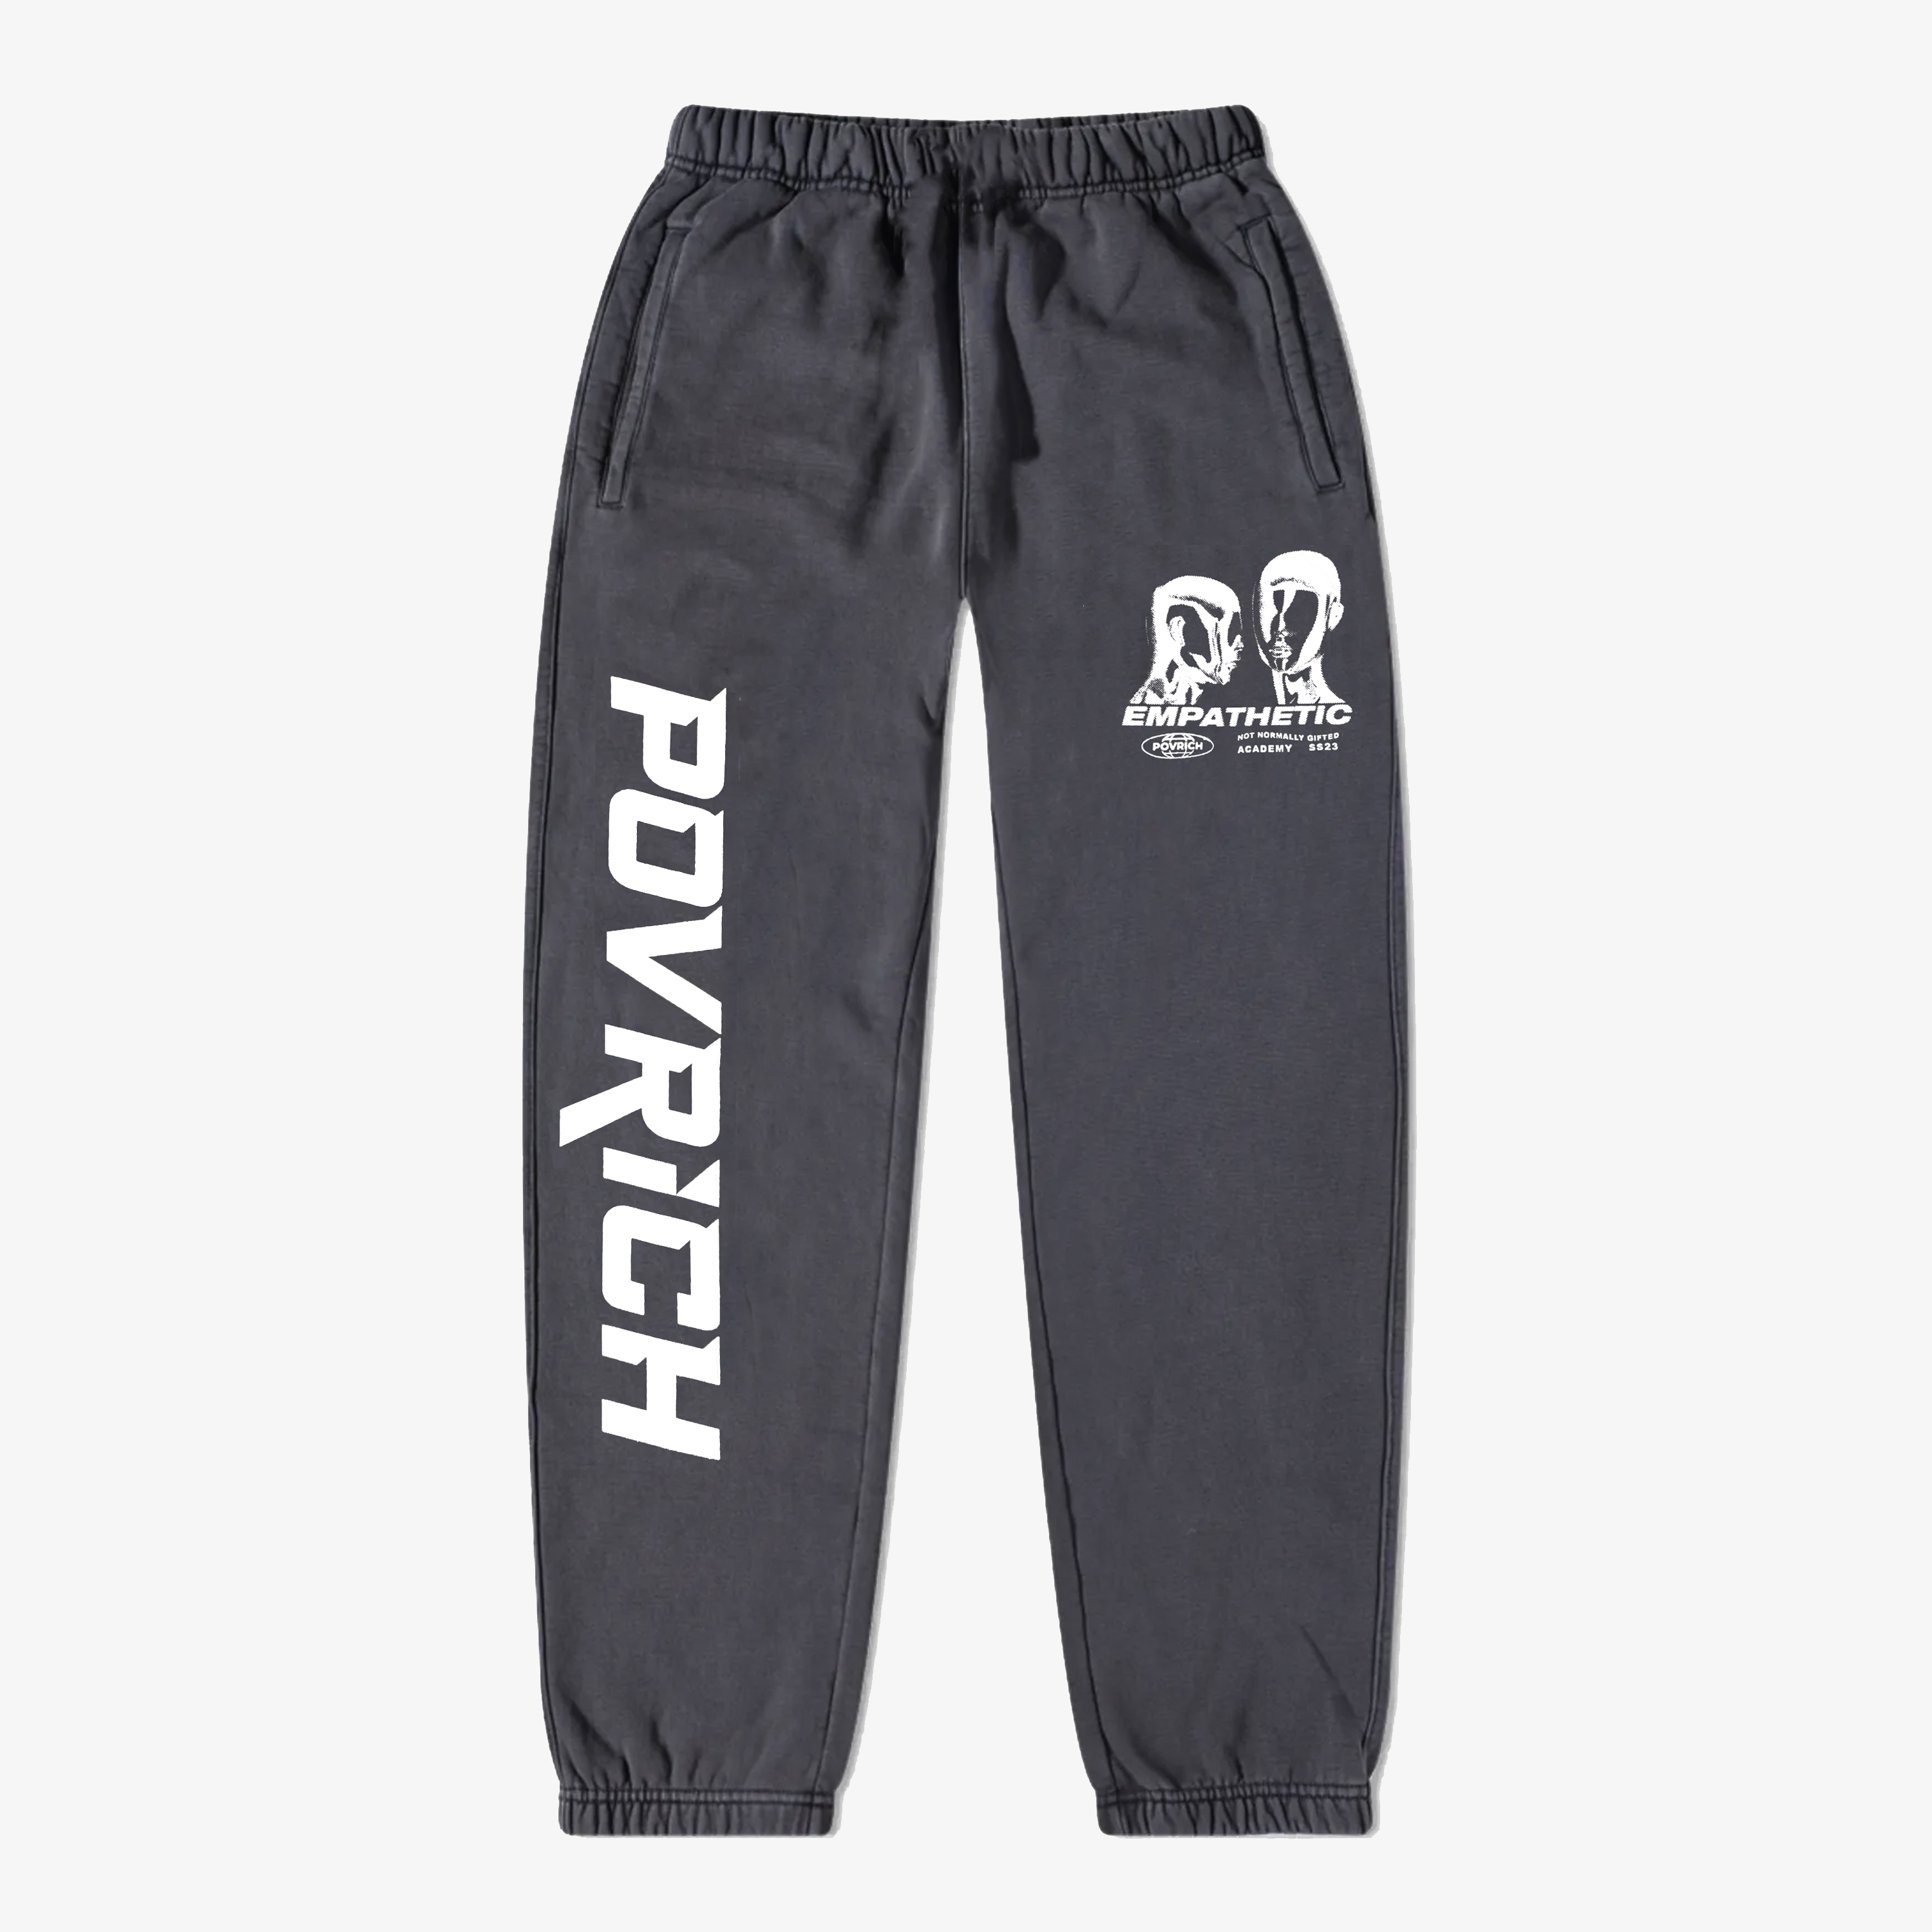 Empathetic Joggers by Povrich, featuring a tapered fit, elasticated waistband, and drawstring closure. Made from premium cotton material for maximum comfort. Shadow color with red graphic designs on left & right legs. 